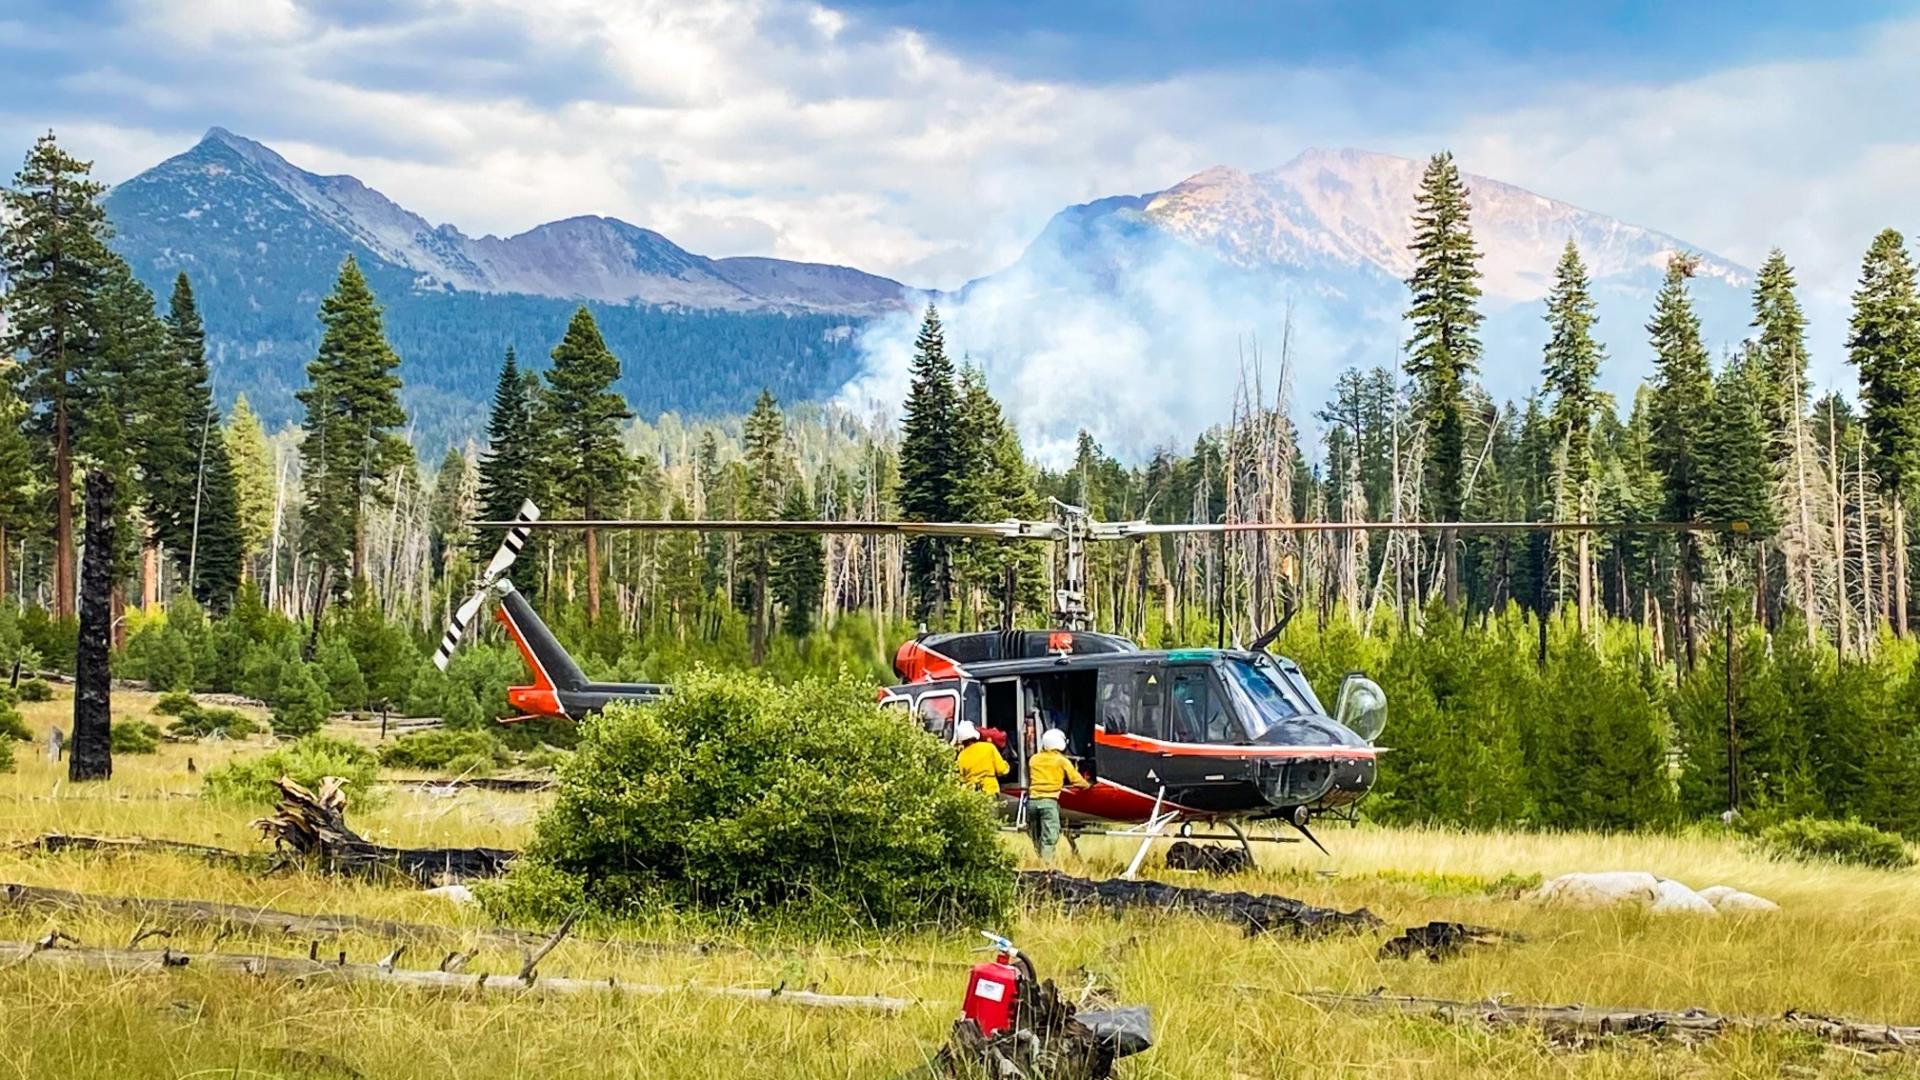 Members of a Yosemite helitack crew work around a helicopter in a grassy field. Trees border the field, with smoke rising from their midst. Mountains rise in the distance under a stormy sky. Photo by Yosemite National Park.